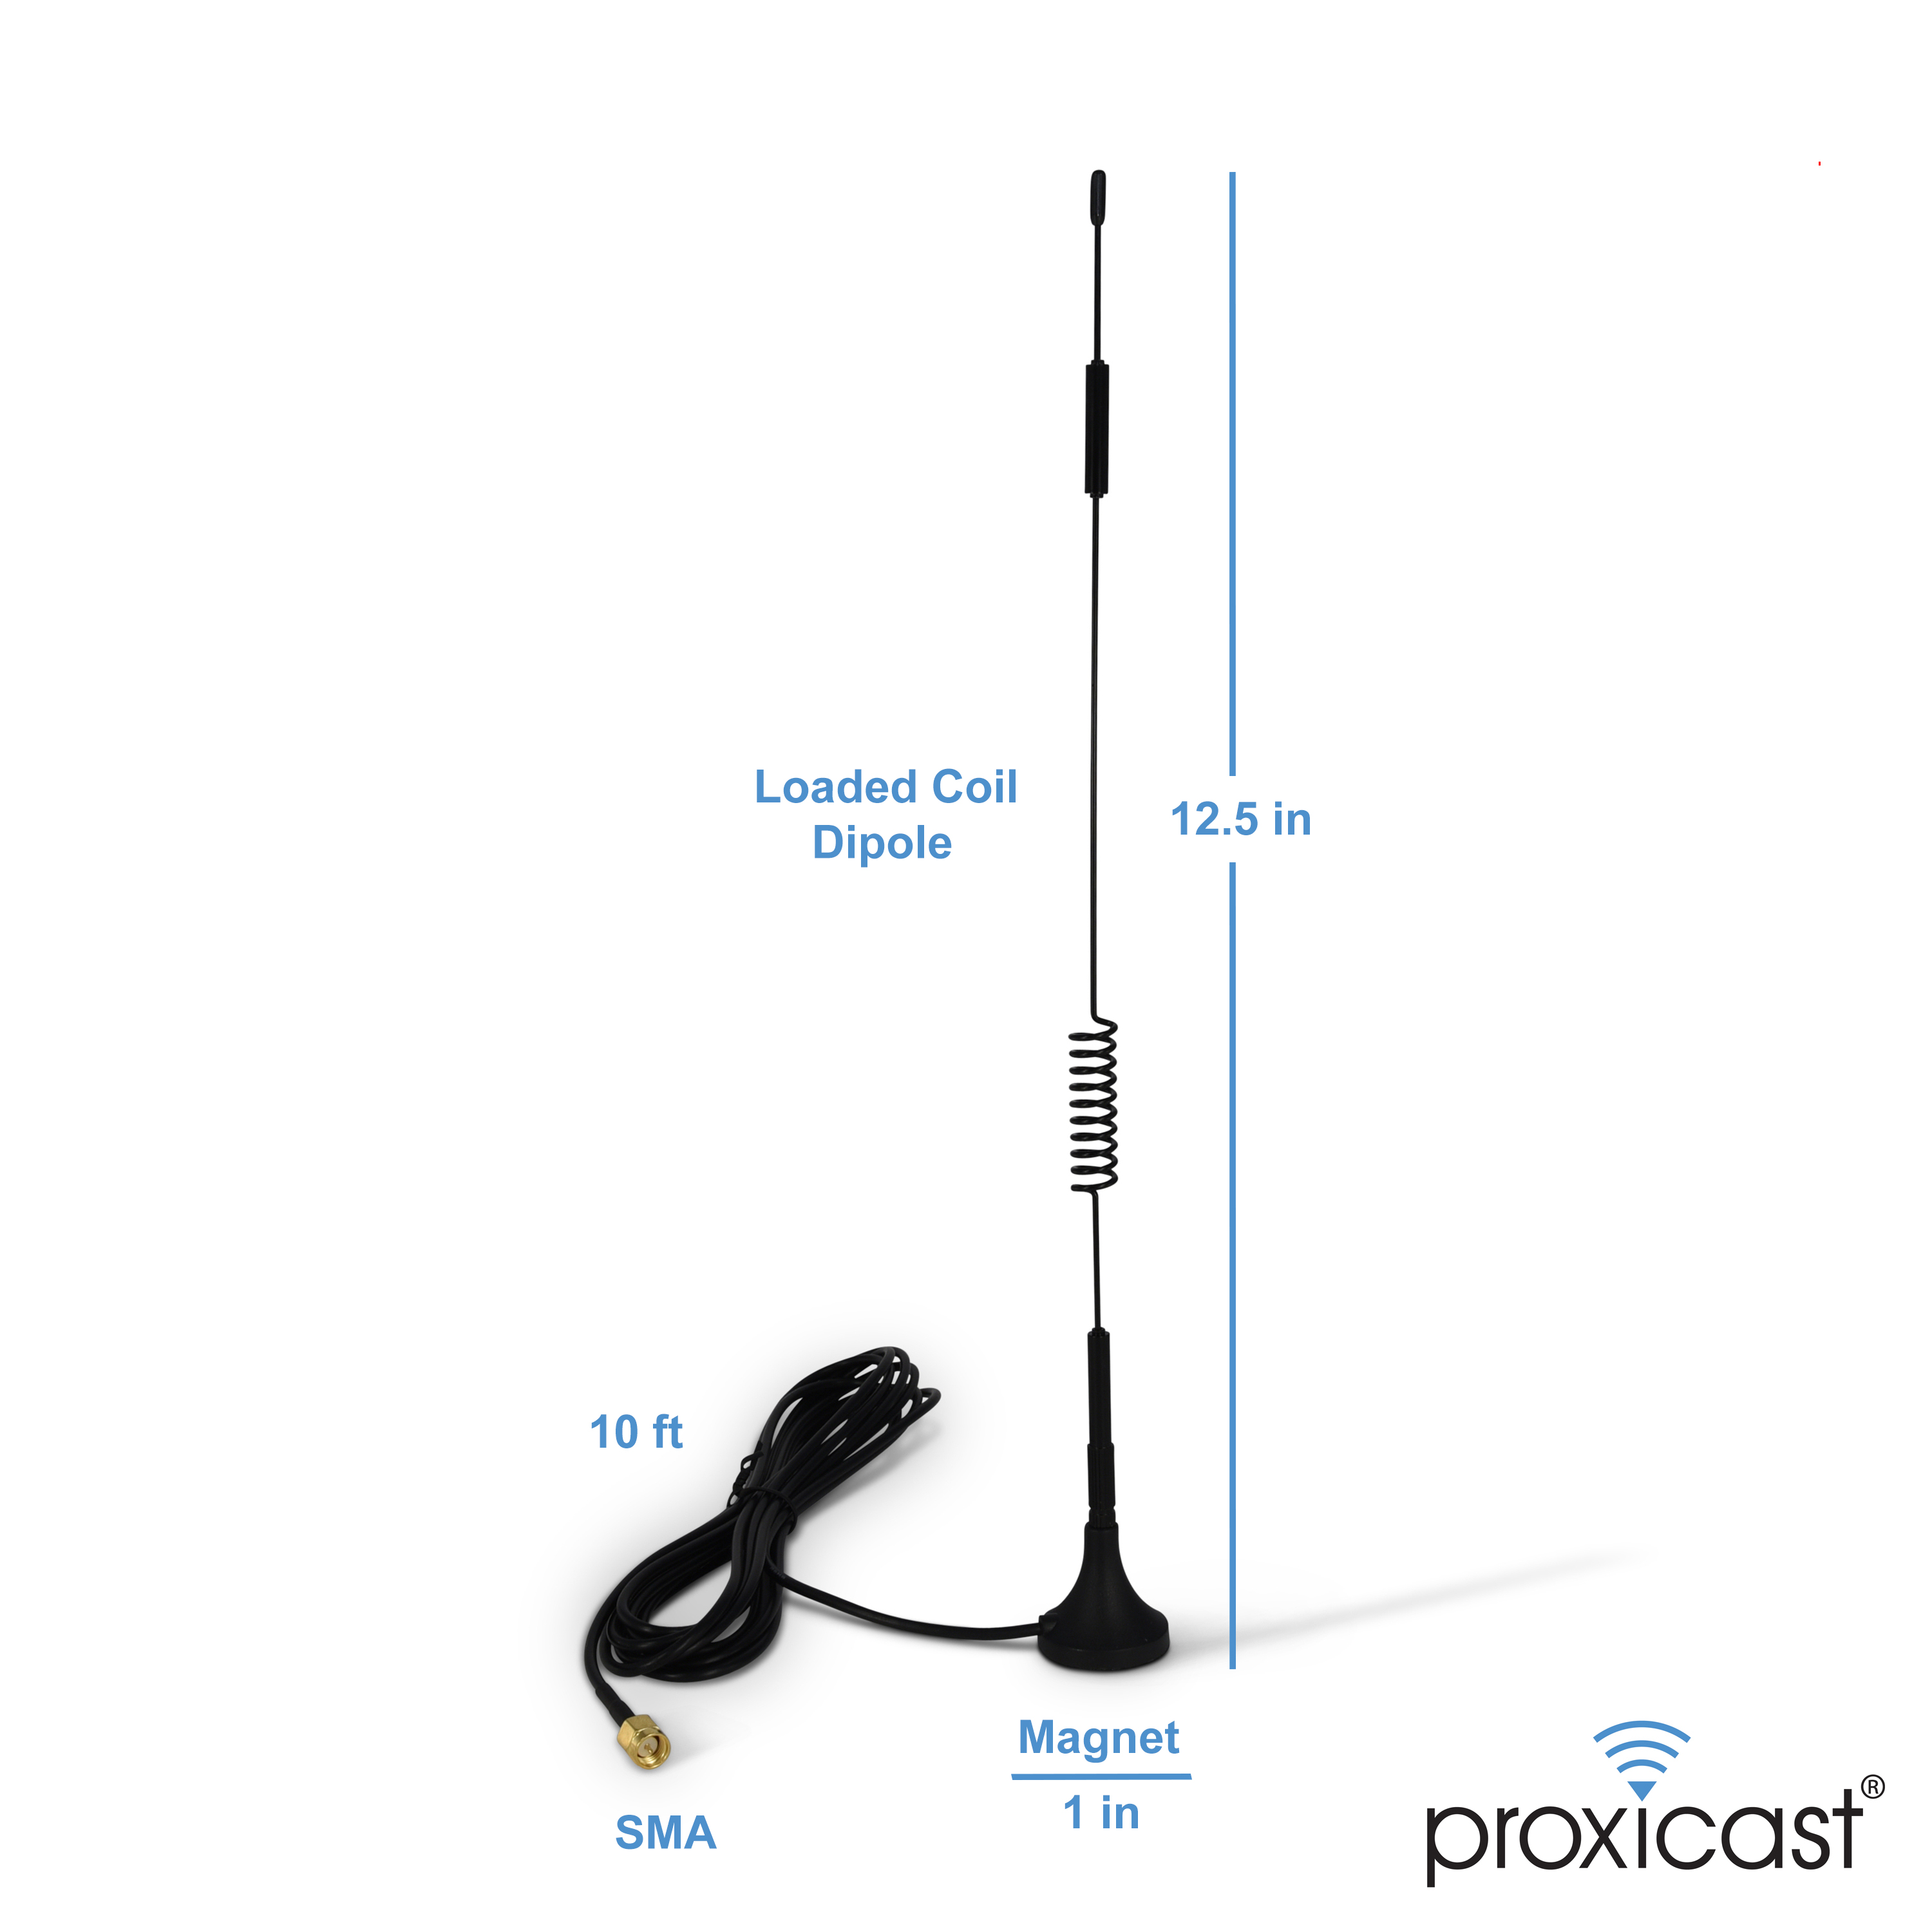 Alda PQ Antenna with magnetic stand for 4G LTE with SMA/M plug and 5m 5.46 yd cable 2.2 dBi gain